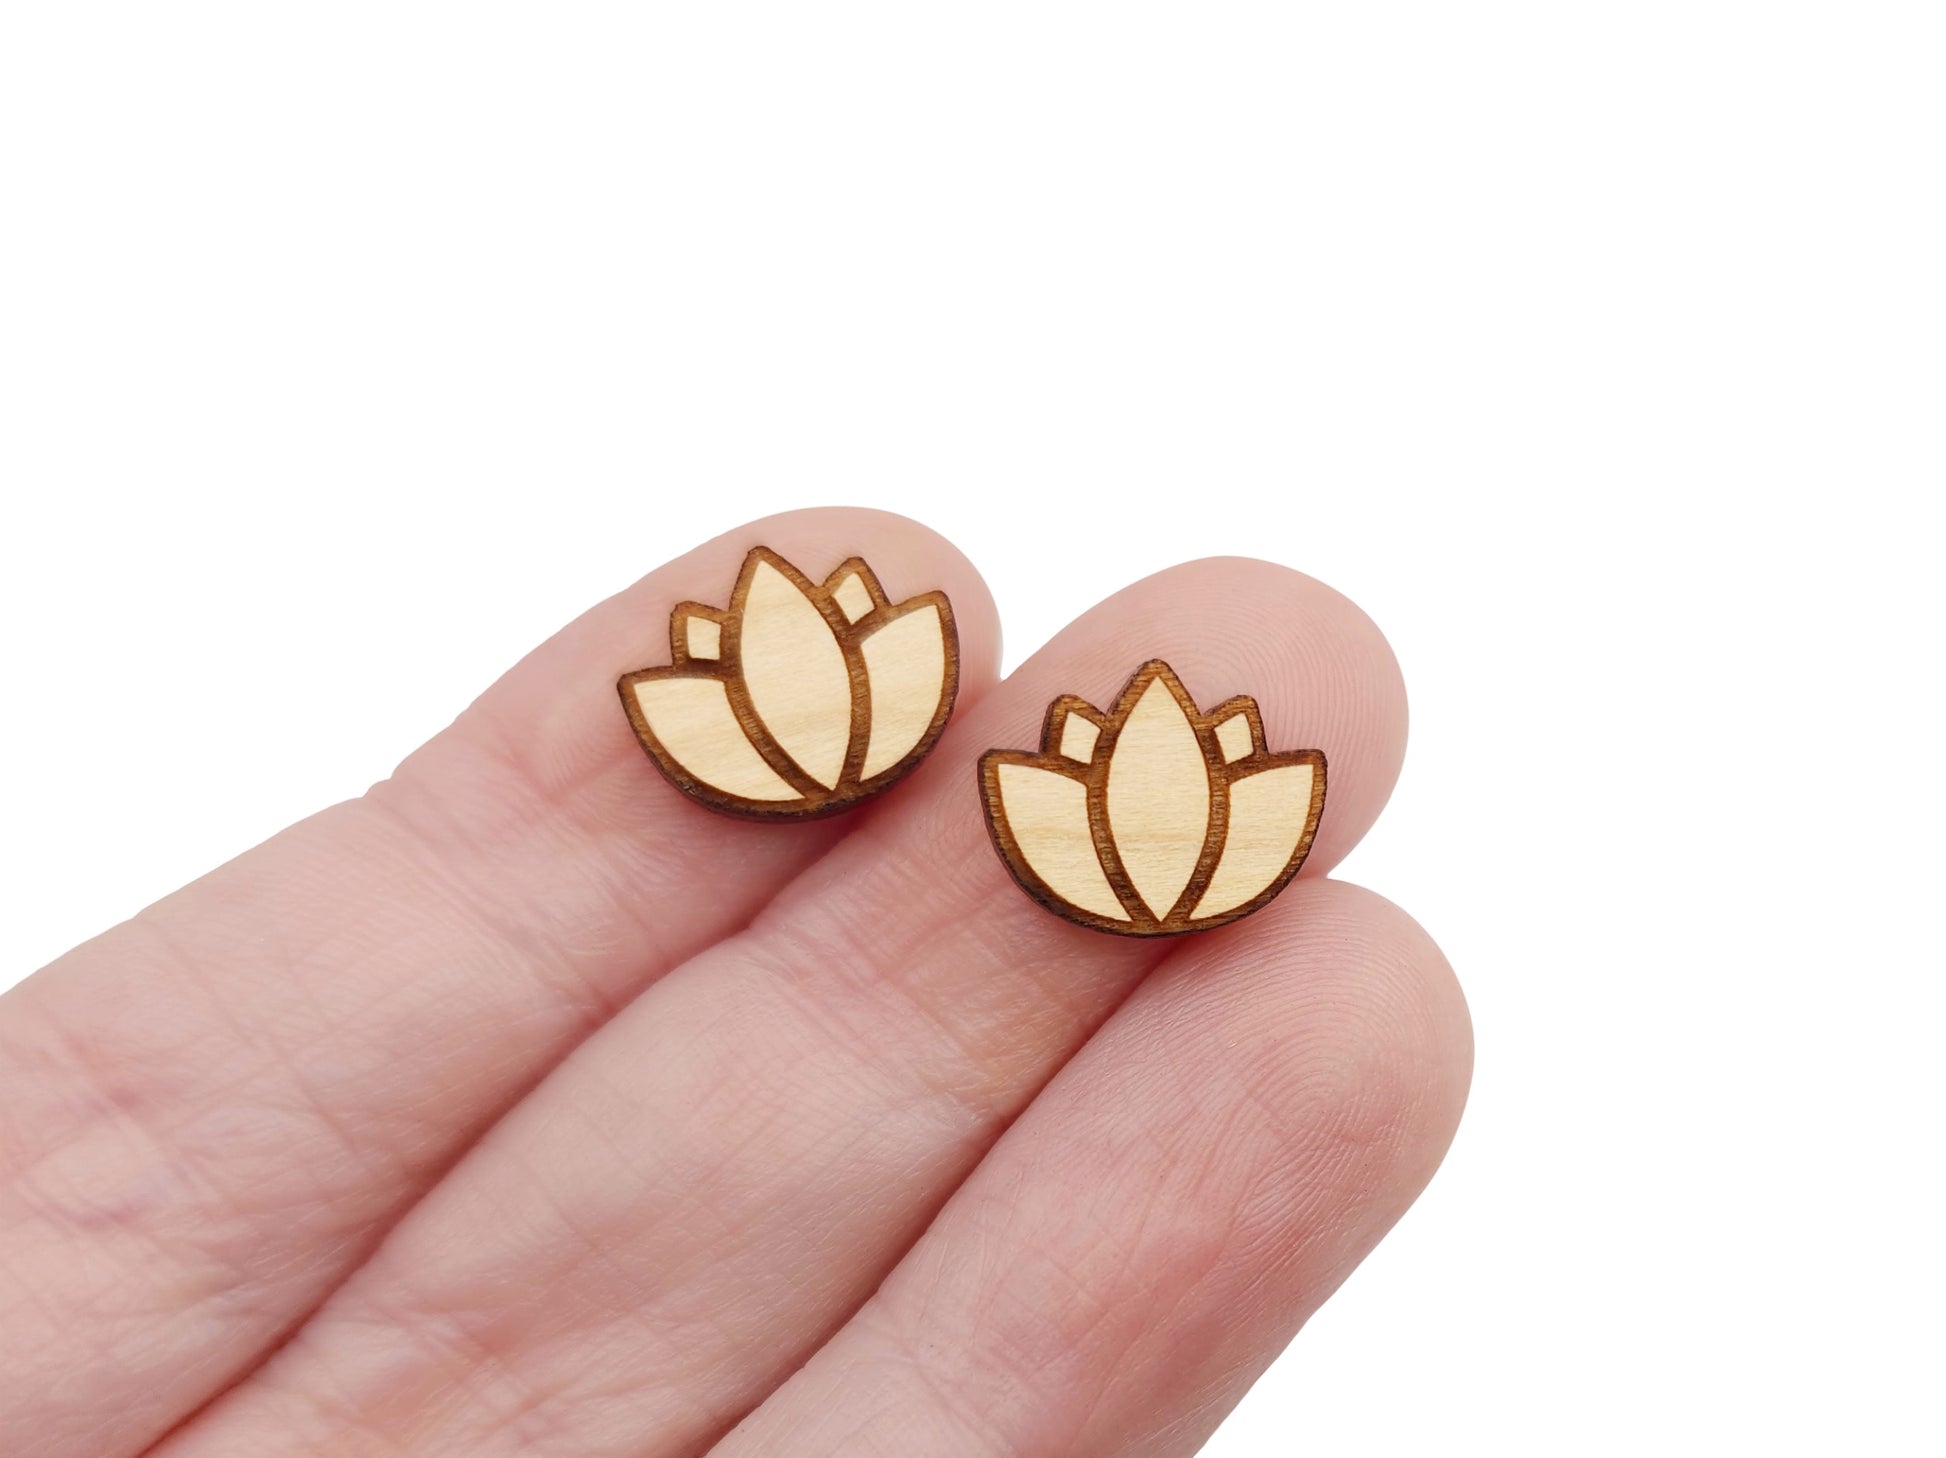 a hand holding a pair of wooden cabochon earring blanks cut and engraved to look like a lotus flower